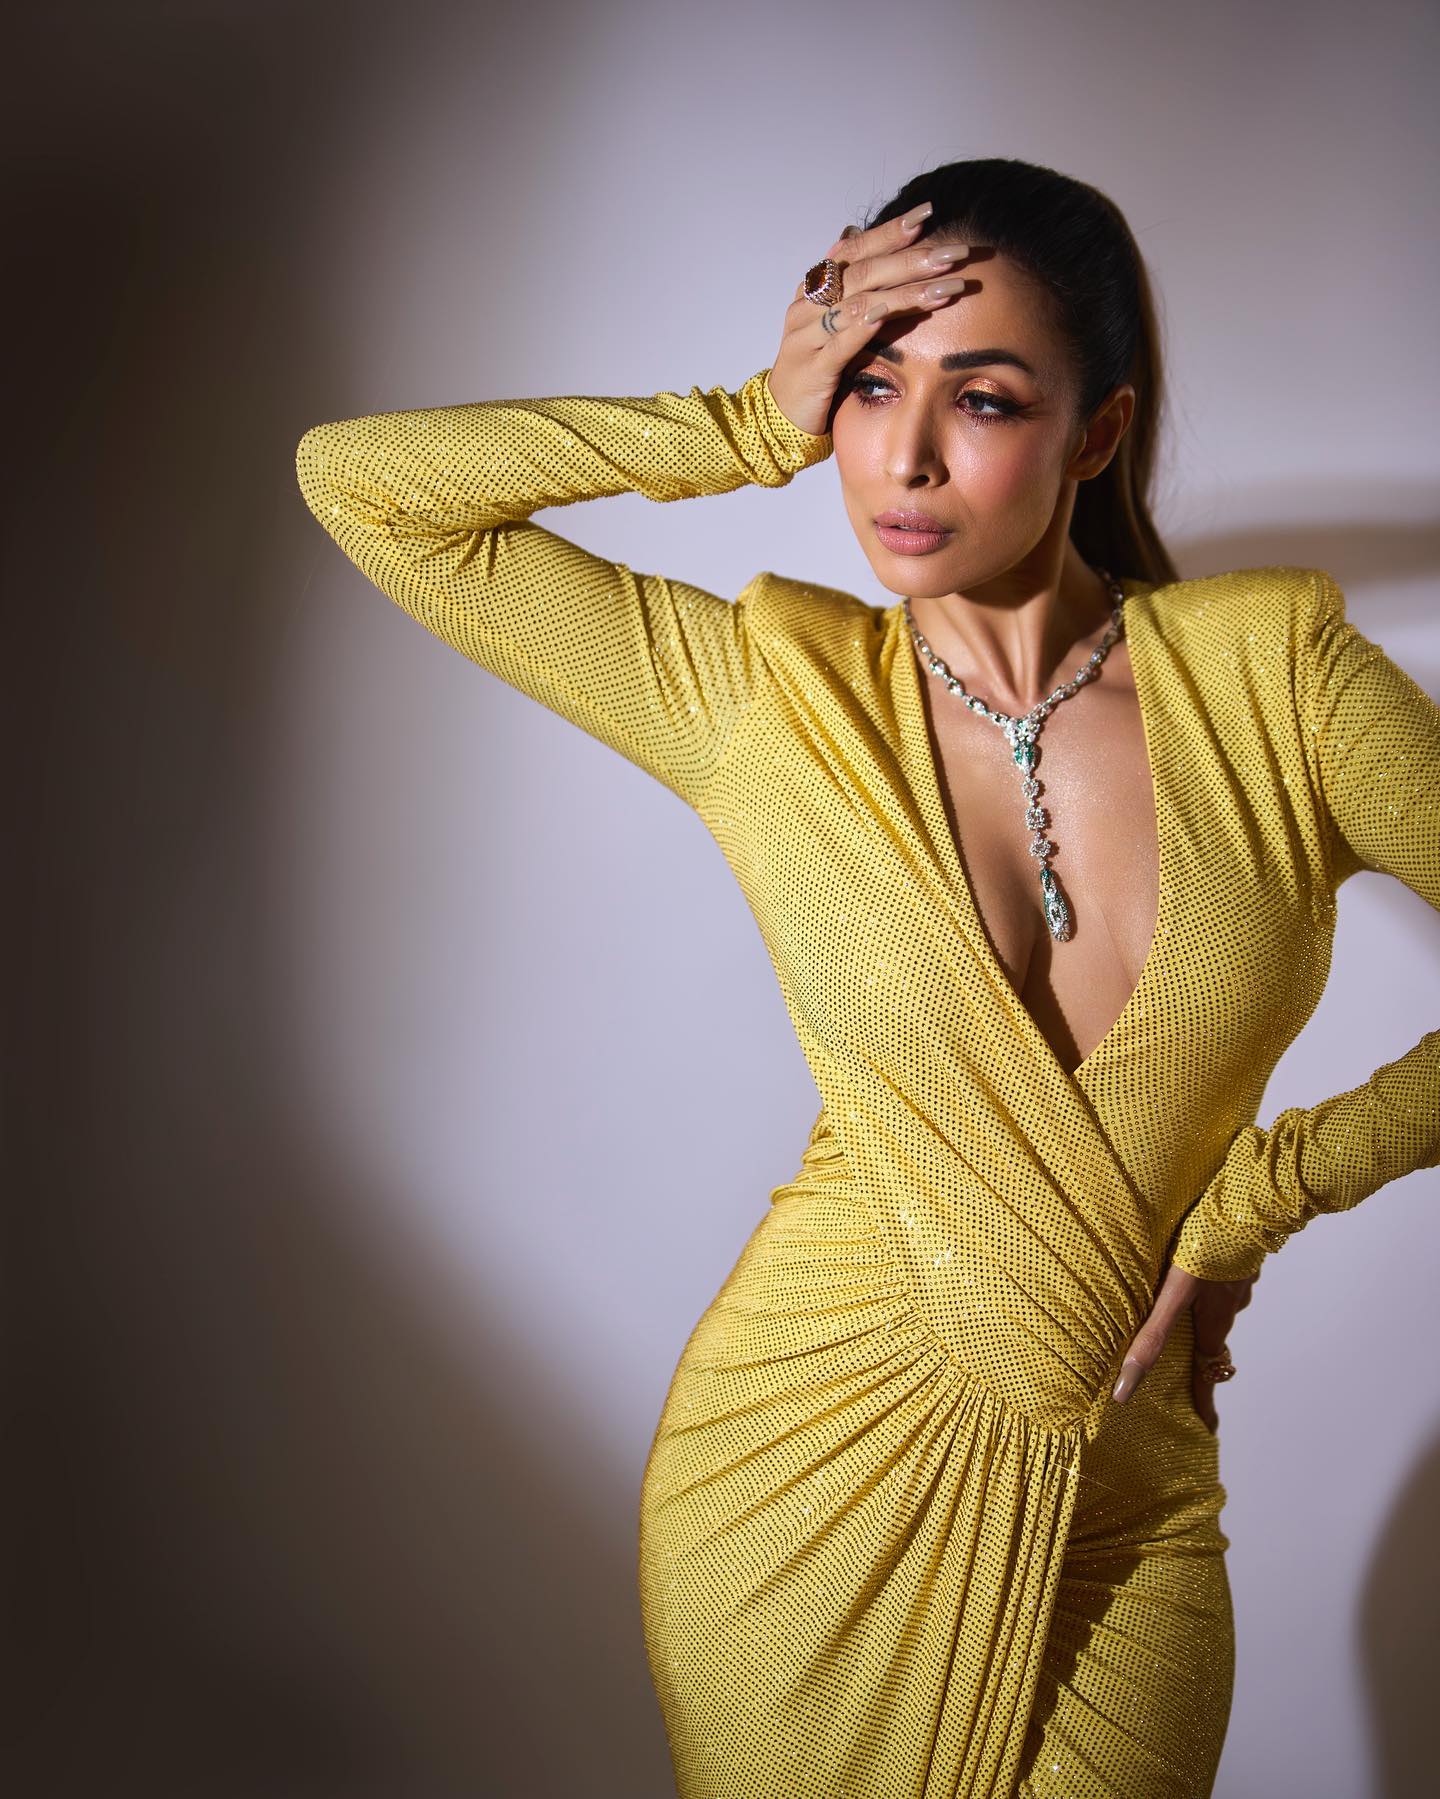 Malaika Arora made a dazzling appearance at the 2022 Filmfare Awards in a sexy cleavage-baring yellow dress